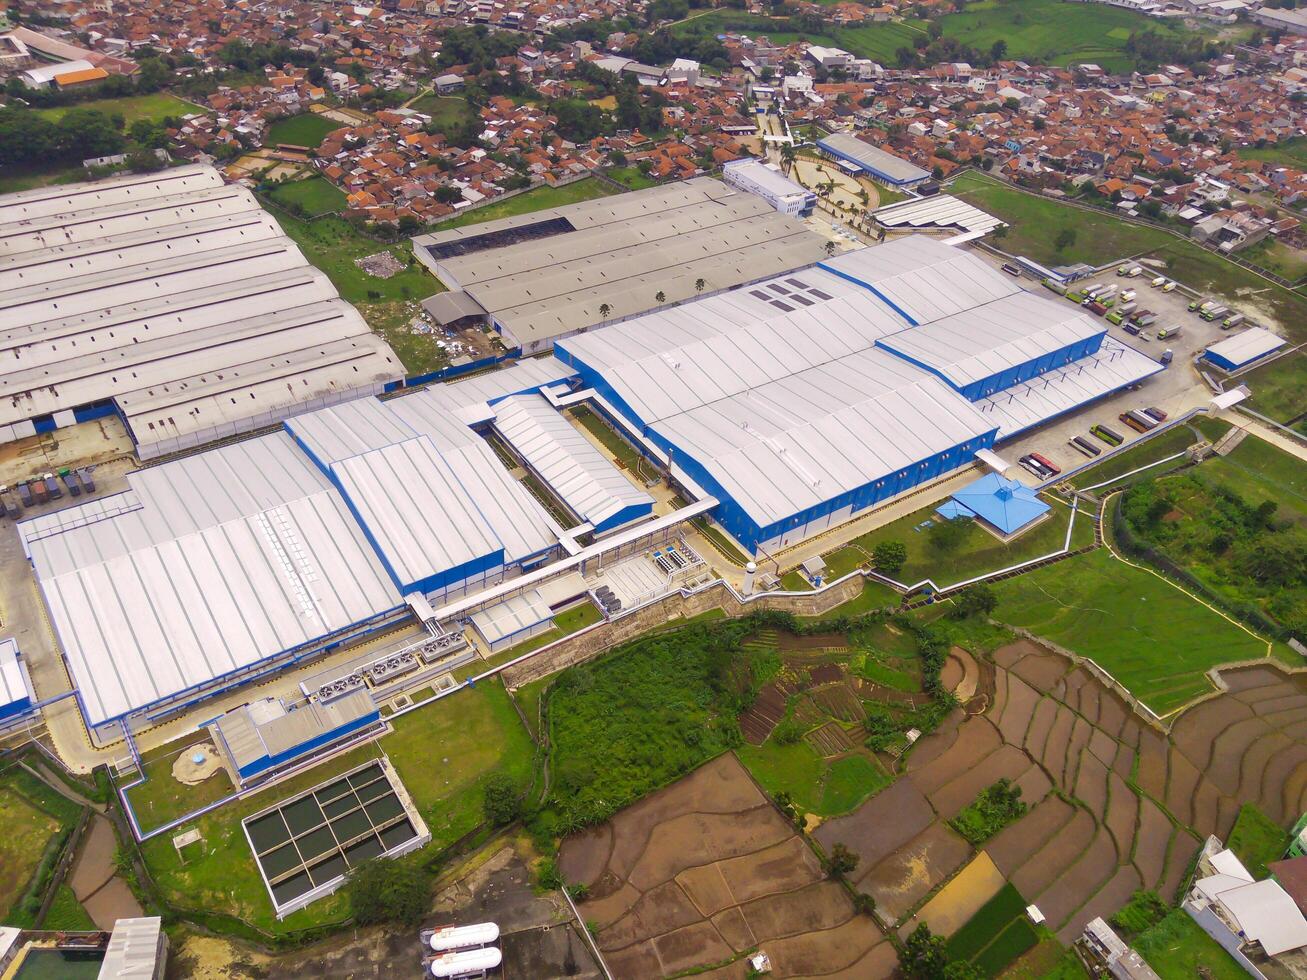 Snack Factory on the outskirts of town. Aerial view of factory in mountain valley, Bandung - Indonesia. Food Industry. Above. Aerial Landscapes. Shot from a drone. photo